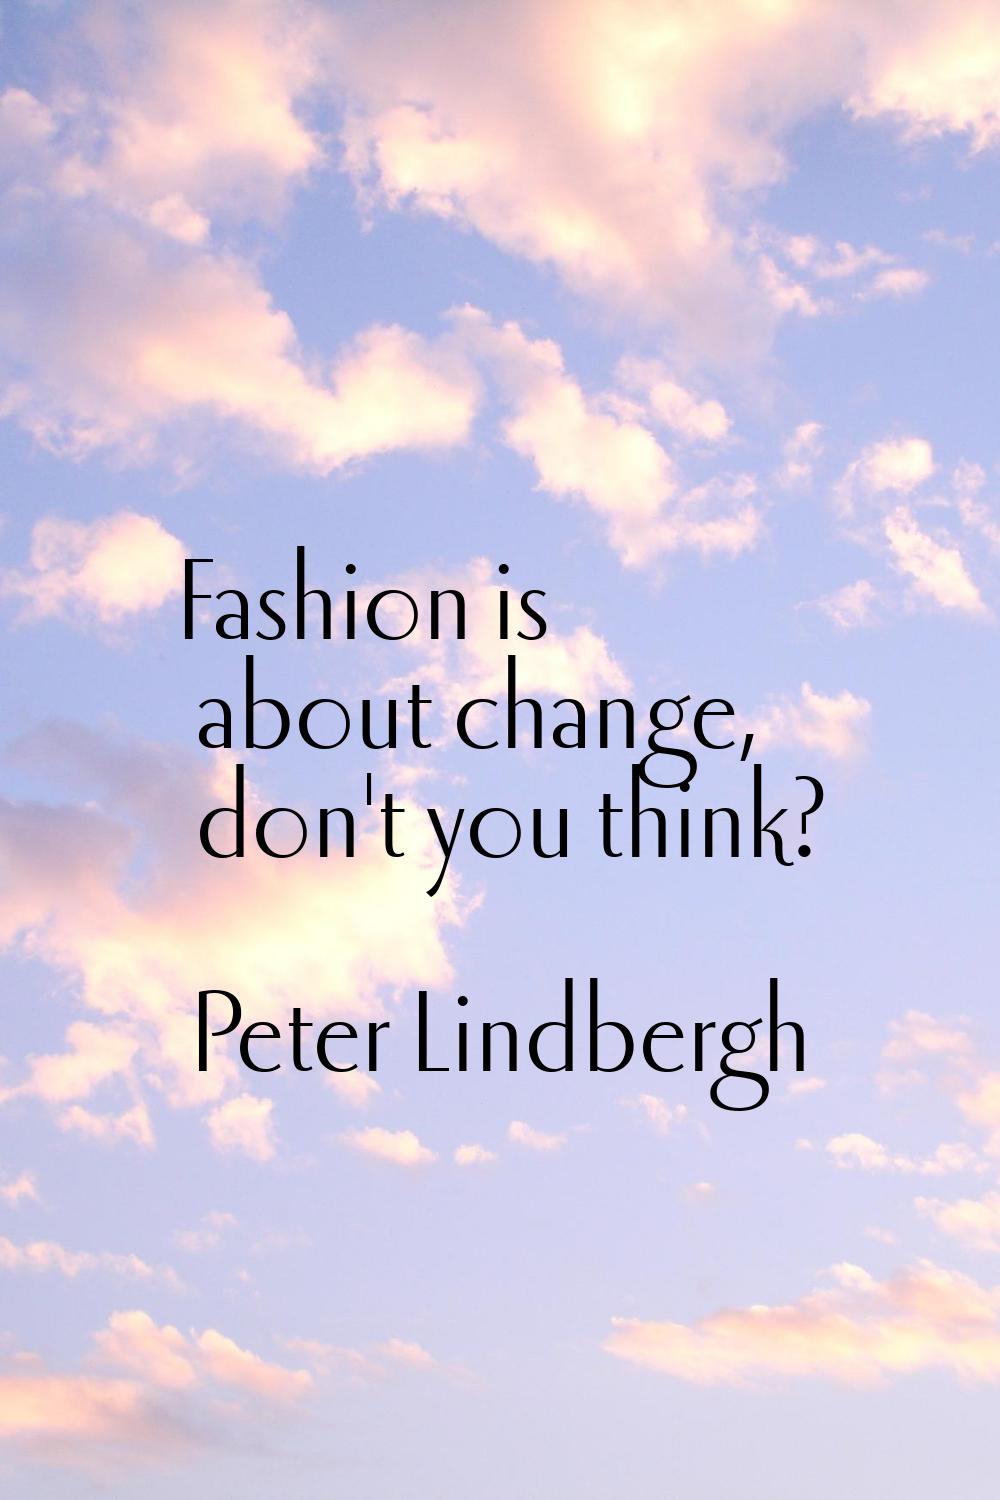 Fashion is about change, don't you think?